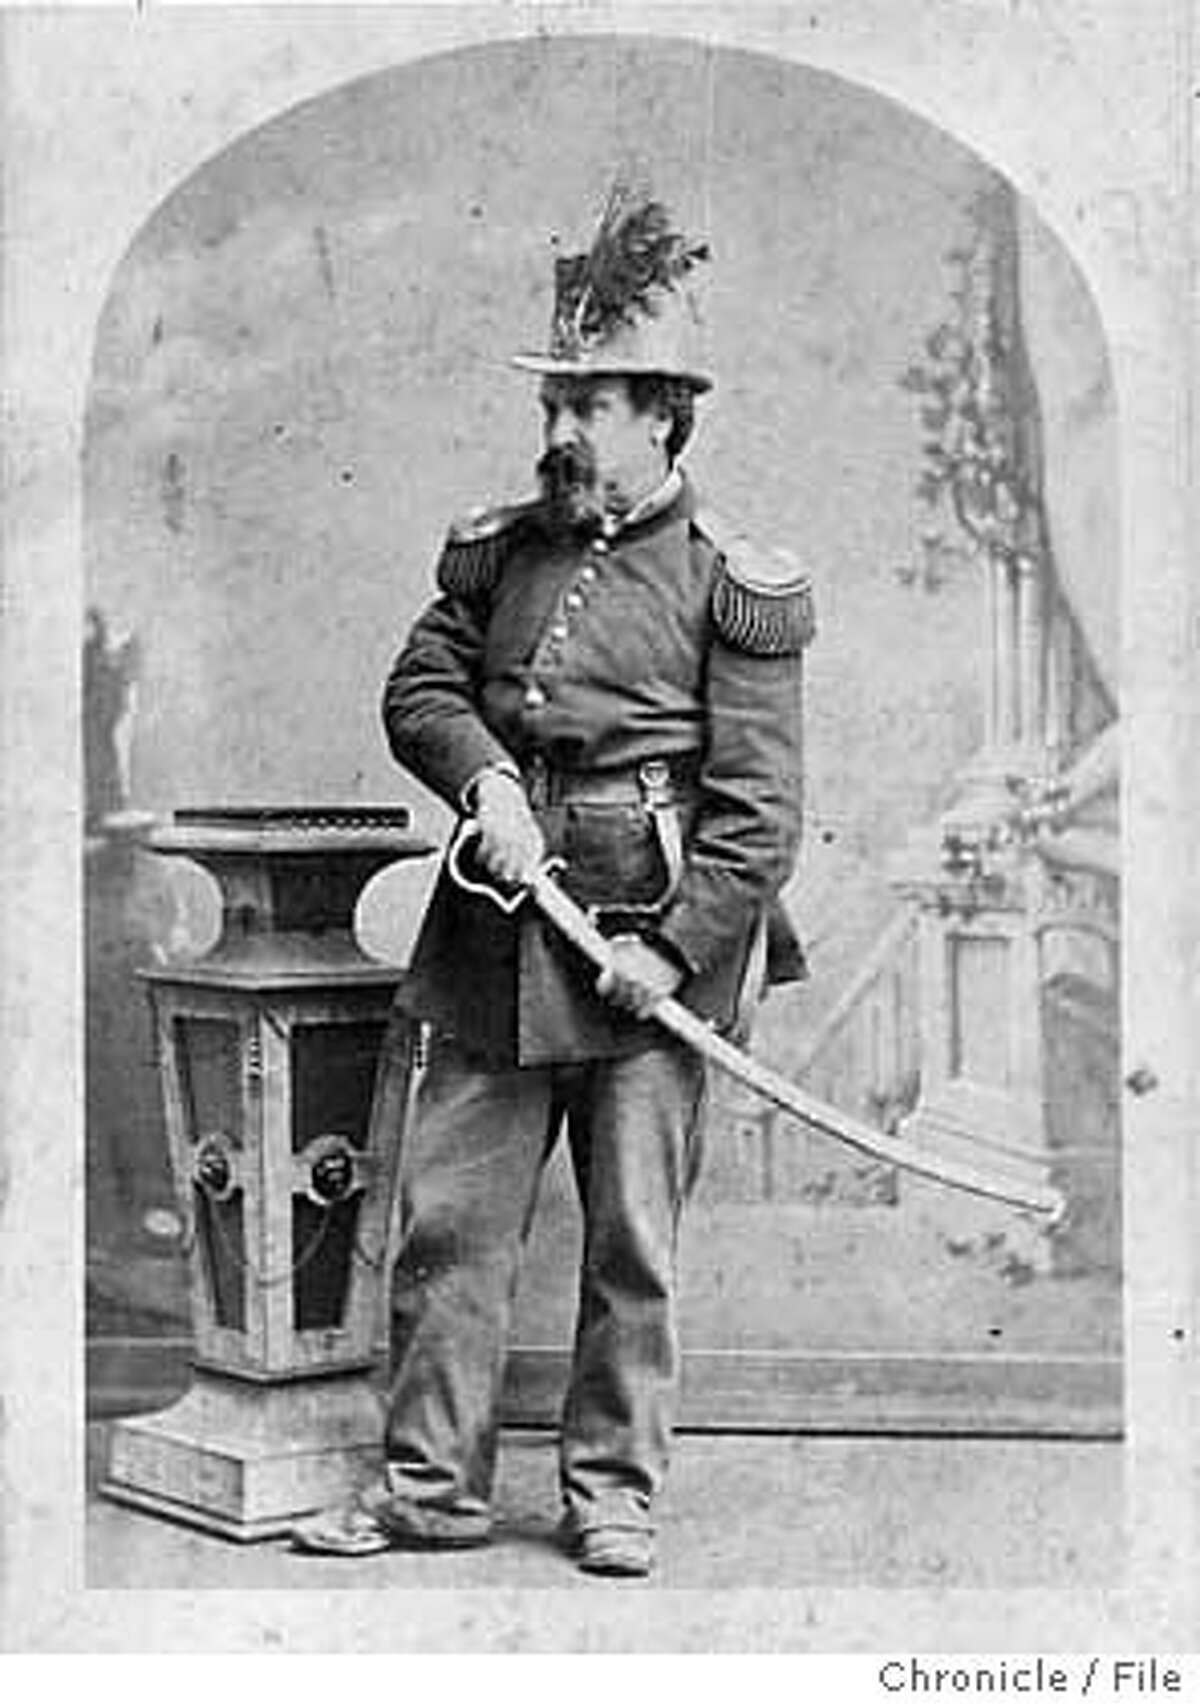 Emperor Norton, San Francisco gadfly and civic visionary. Chronicle file photo